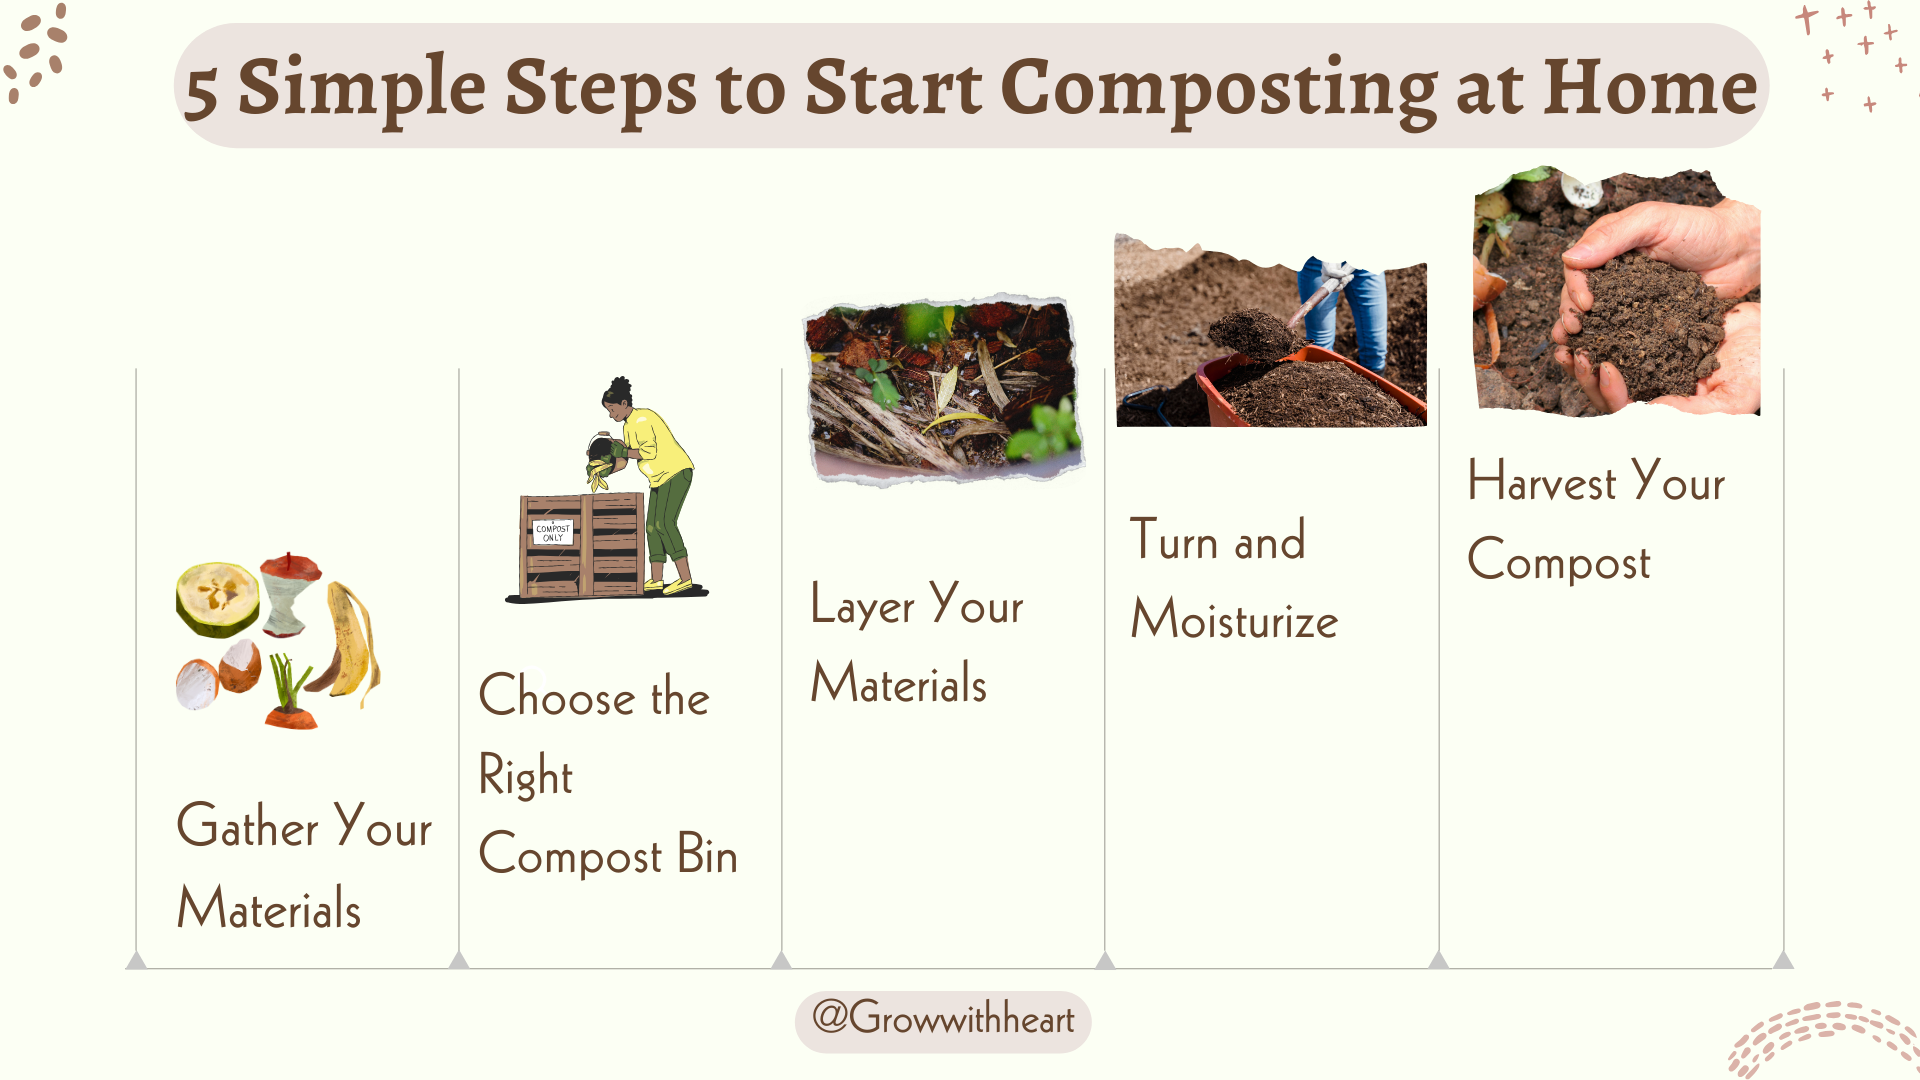 5 Simple steps to start composting at home 